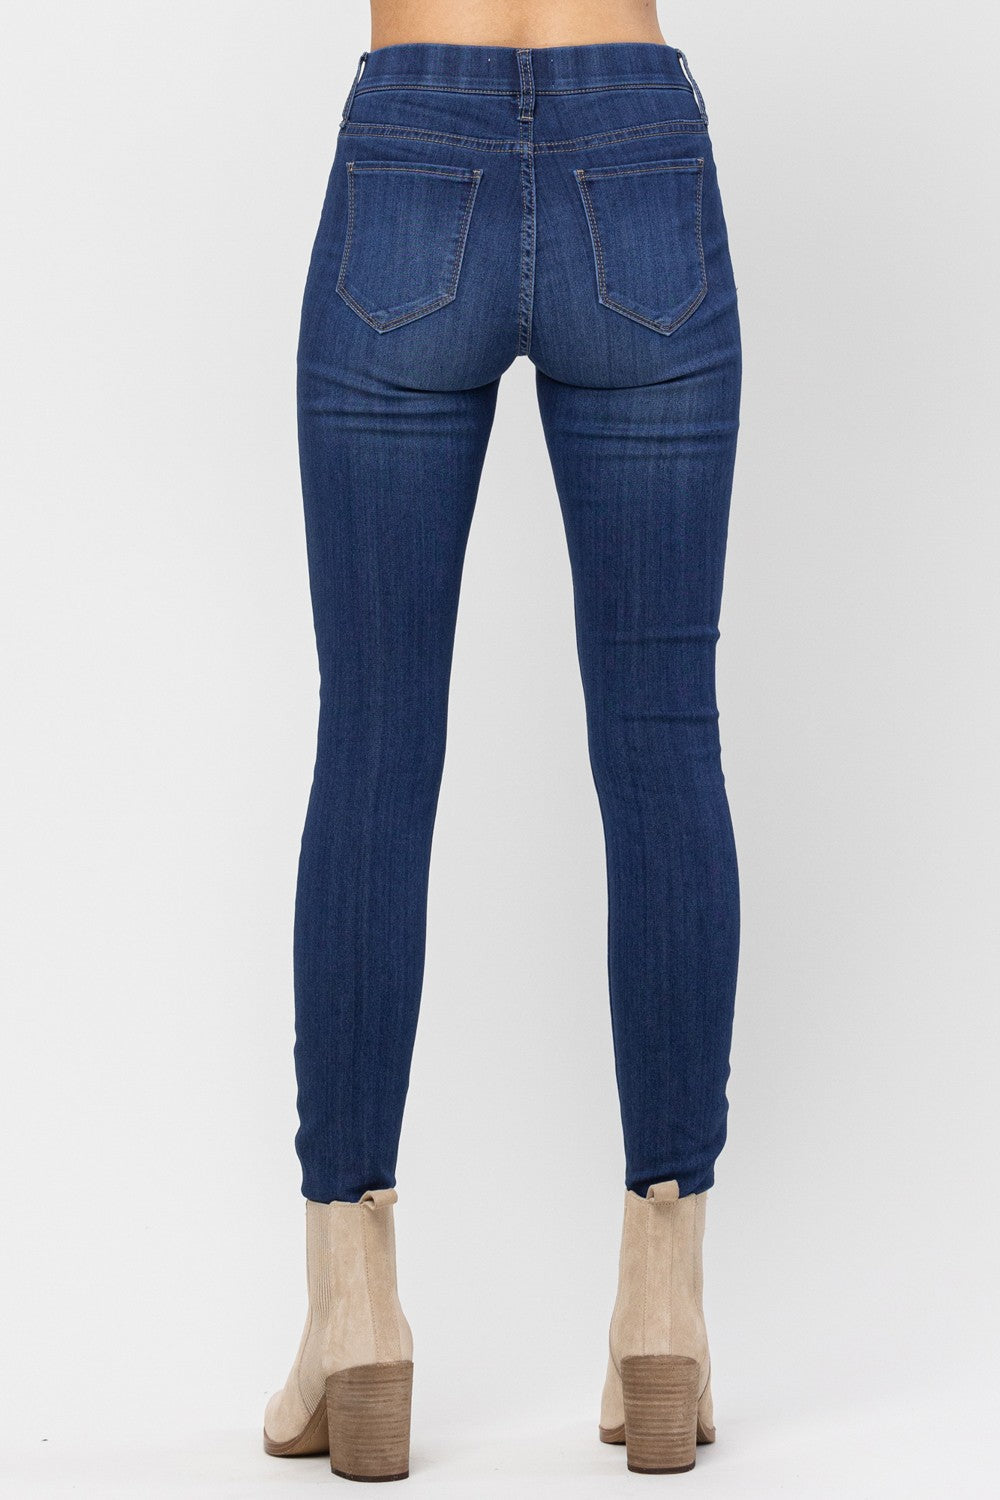 "Jada" Pull On Mid Rise Skinny Jelly Jeans S-3X